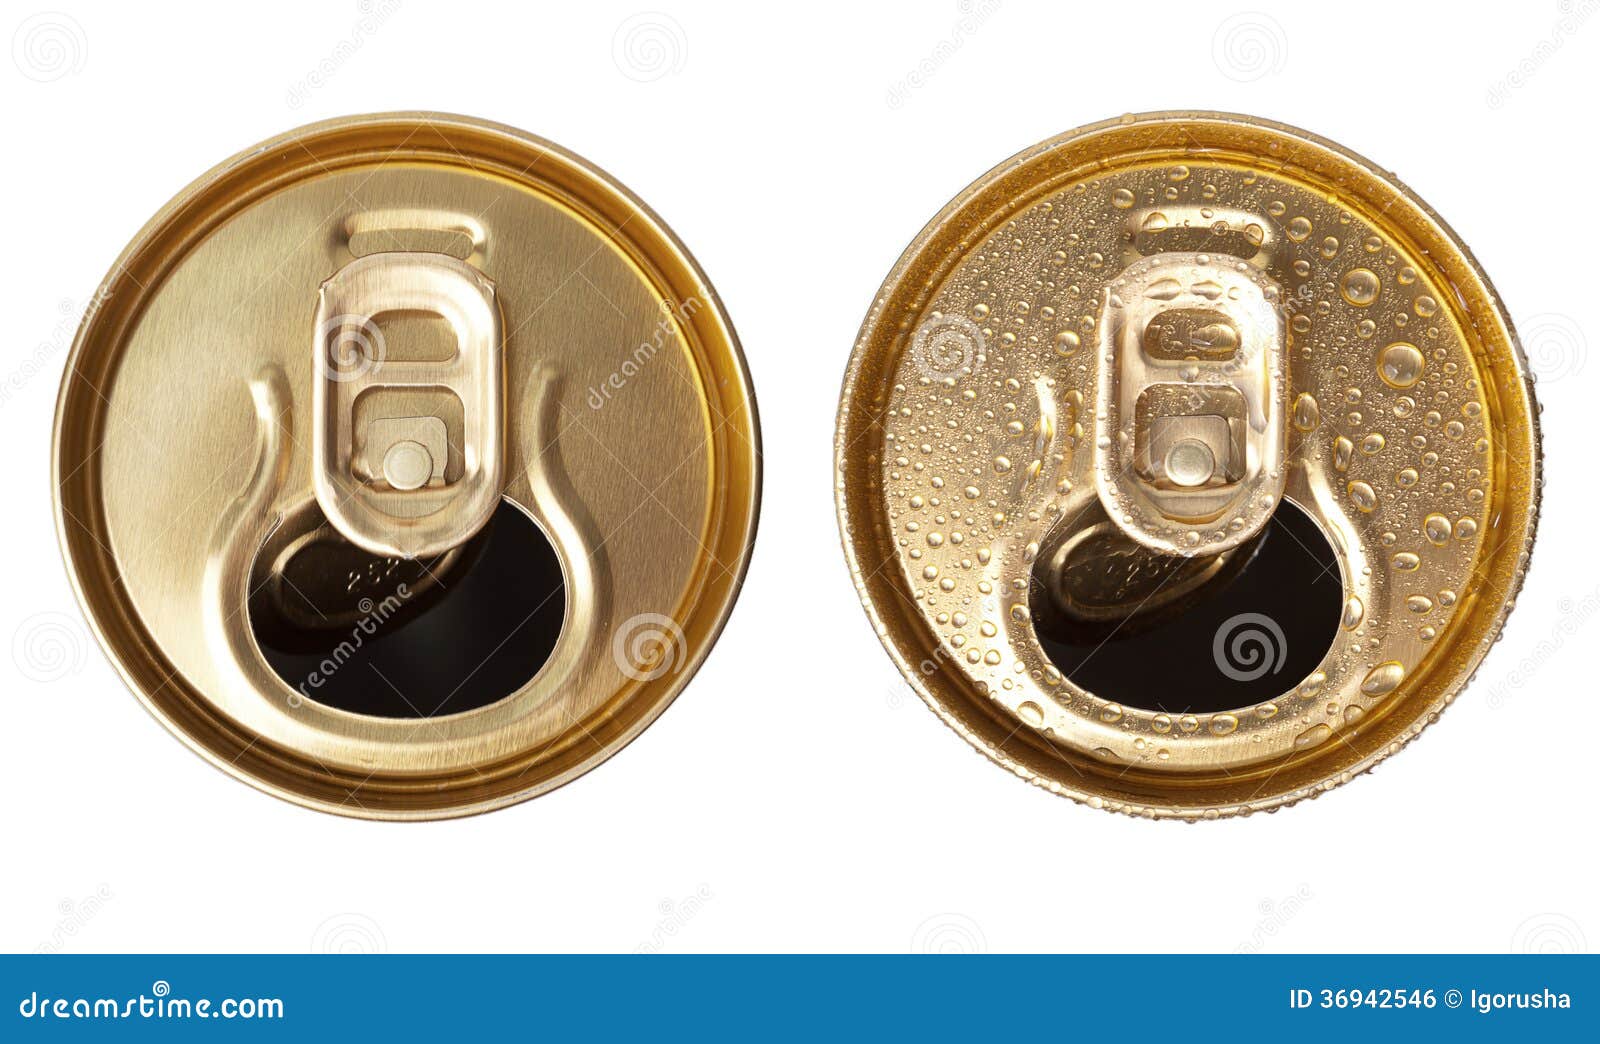 https://thumbs.dreamstime.com/z/beer-can-top-view-two-cans-white-background-36942546.jpg